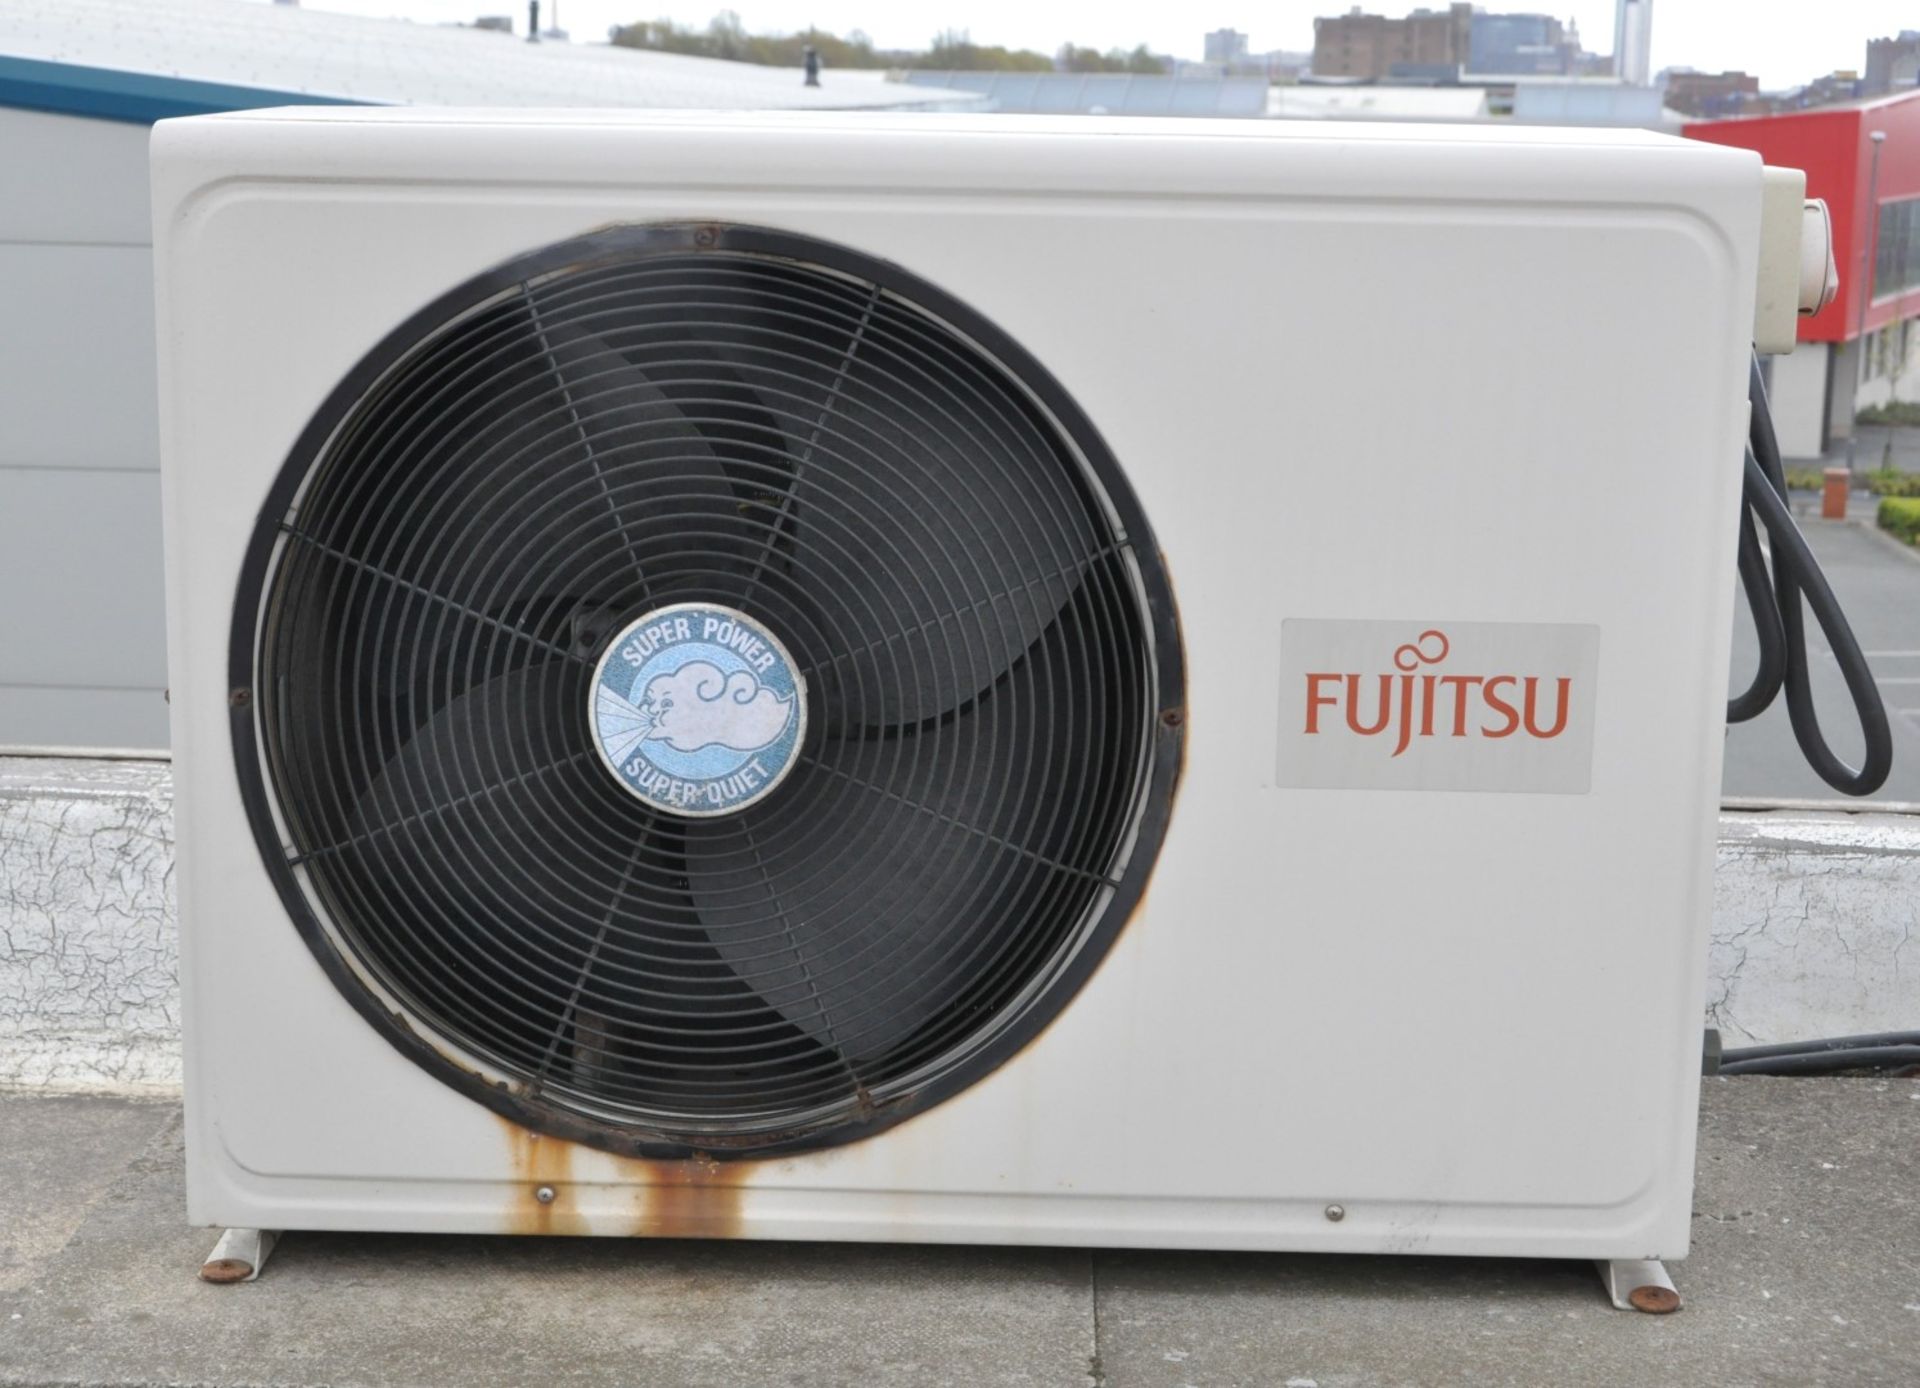 1 x Fujitsu Air Conditioning Indoor Unit - Model AUY25AWA3 - Includes Wall Mounted Control Panel - - Image 7 of 9